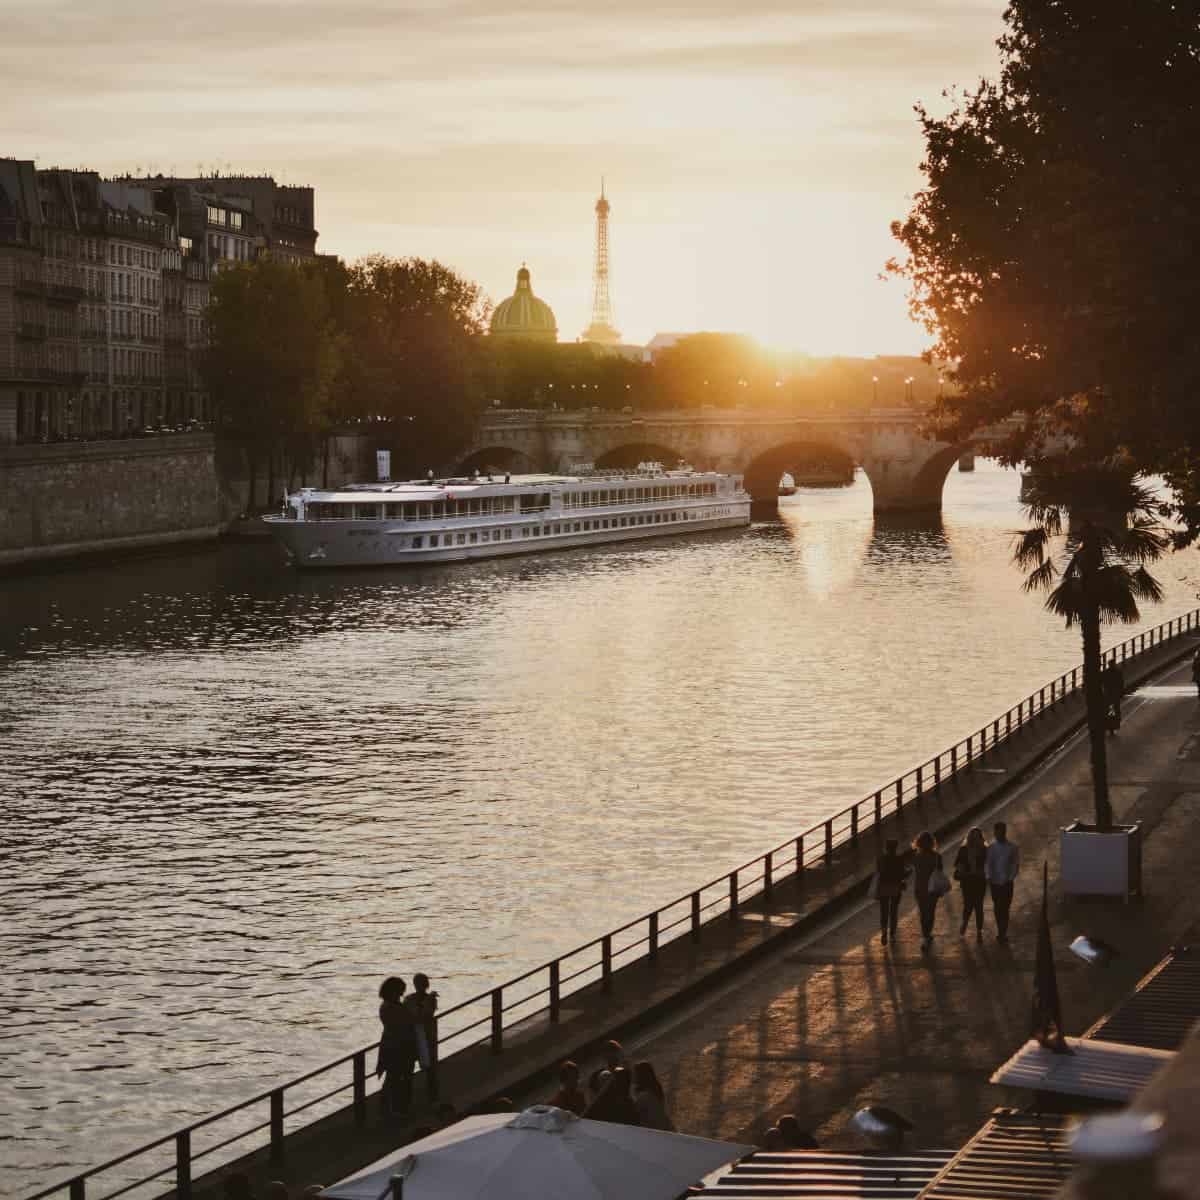 The bank of Seine River with a view of Eiffel Tower